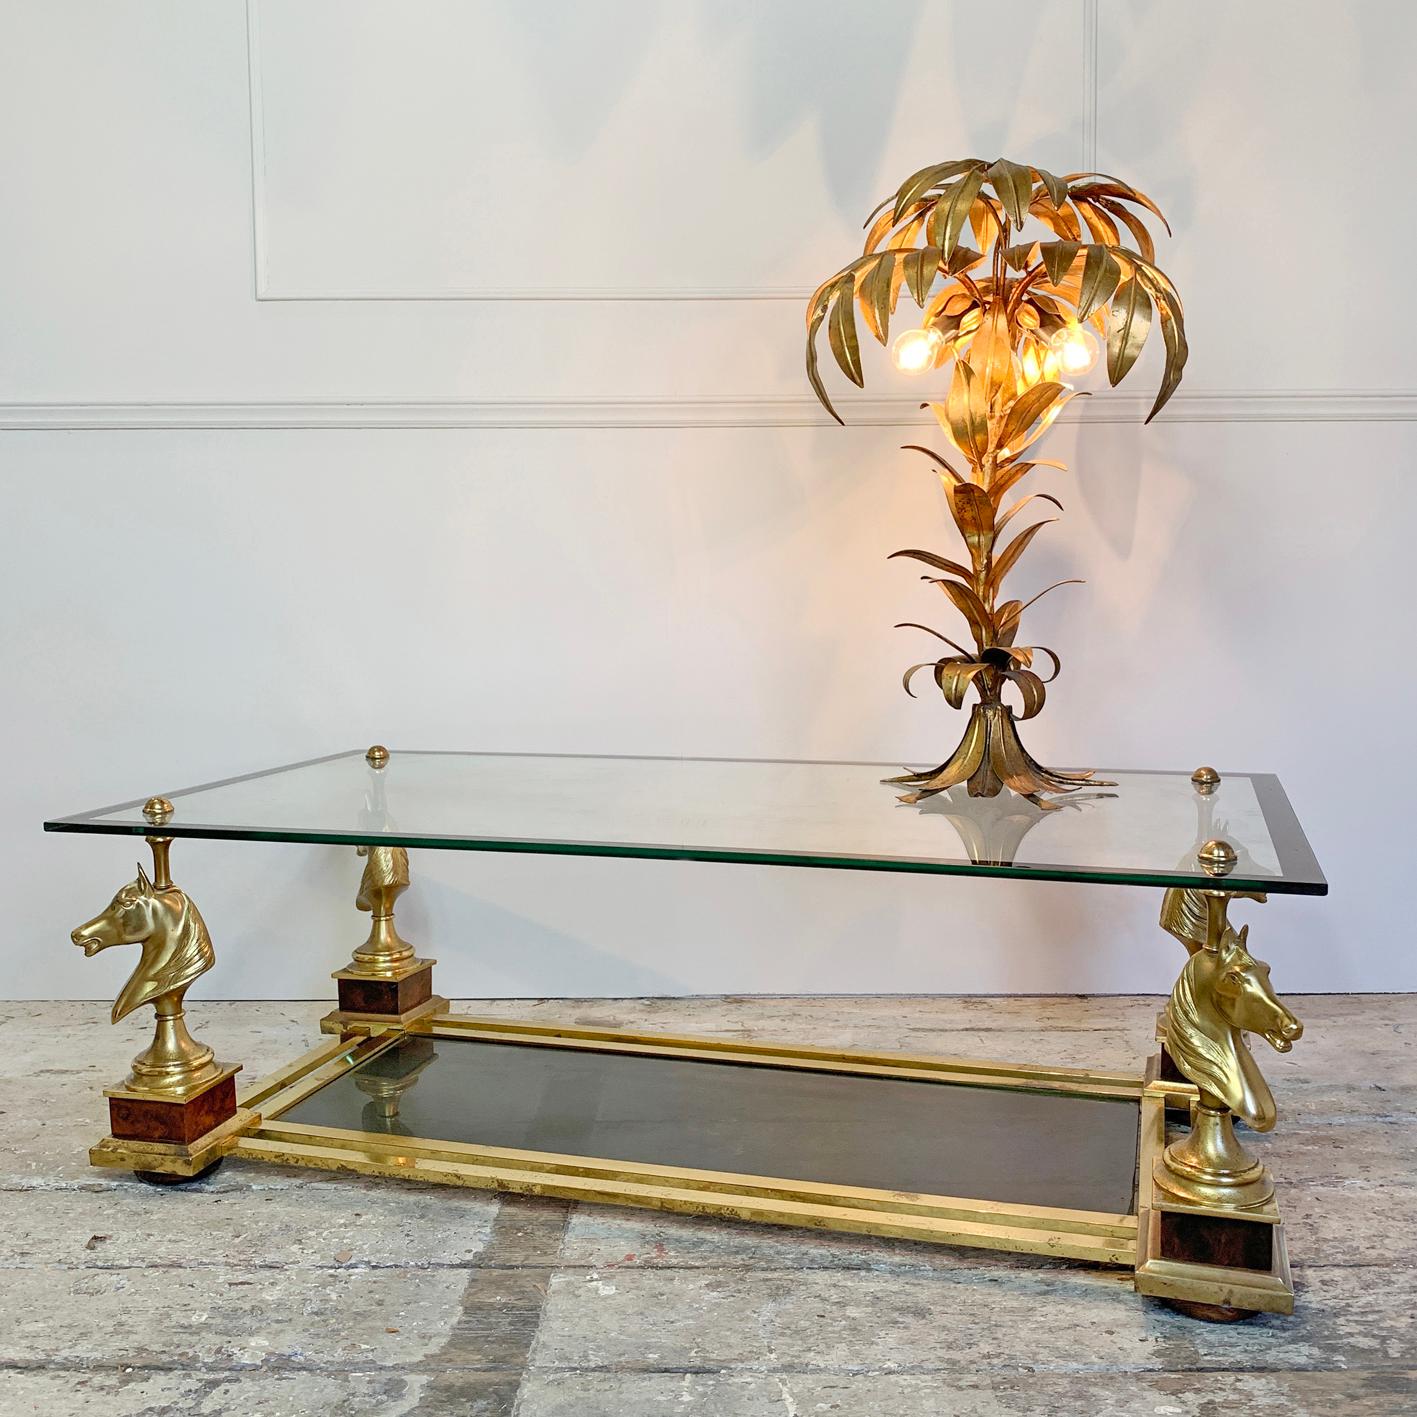 Midcentury French 'Cheval' horse coffee table
Maison Charles,
circa 1950s.
Brass horse heads on each corner supporting a black banded edge clear glass top
Underneath a double banded brass frame supports a further tinted glass shelf
Some